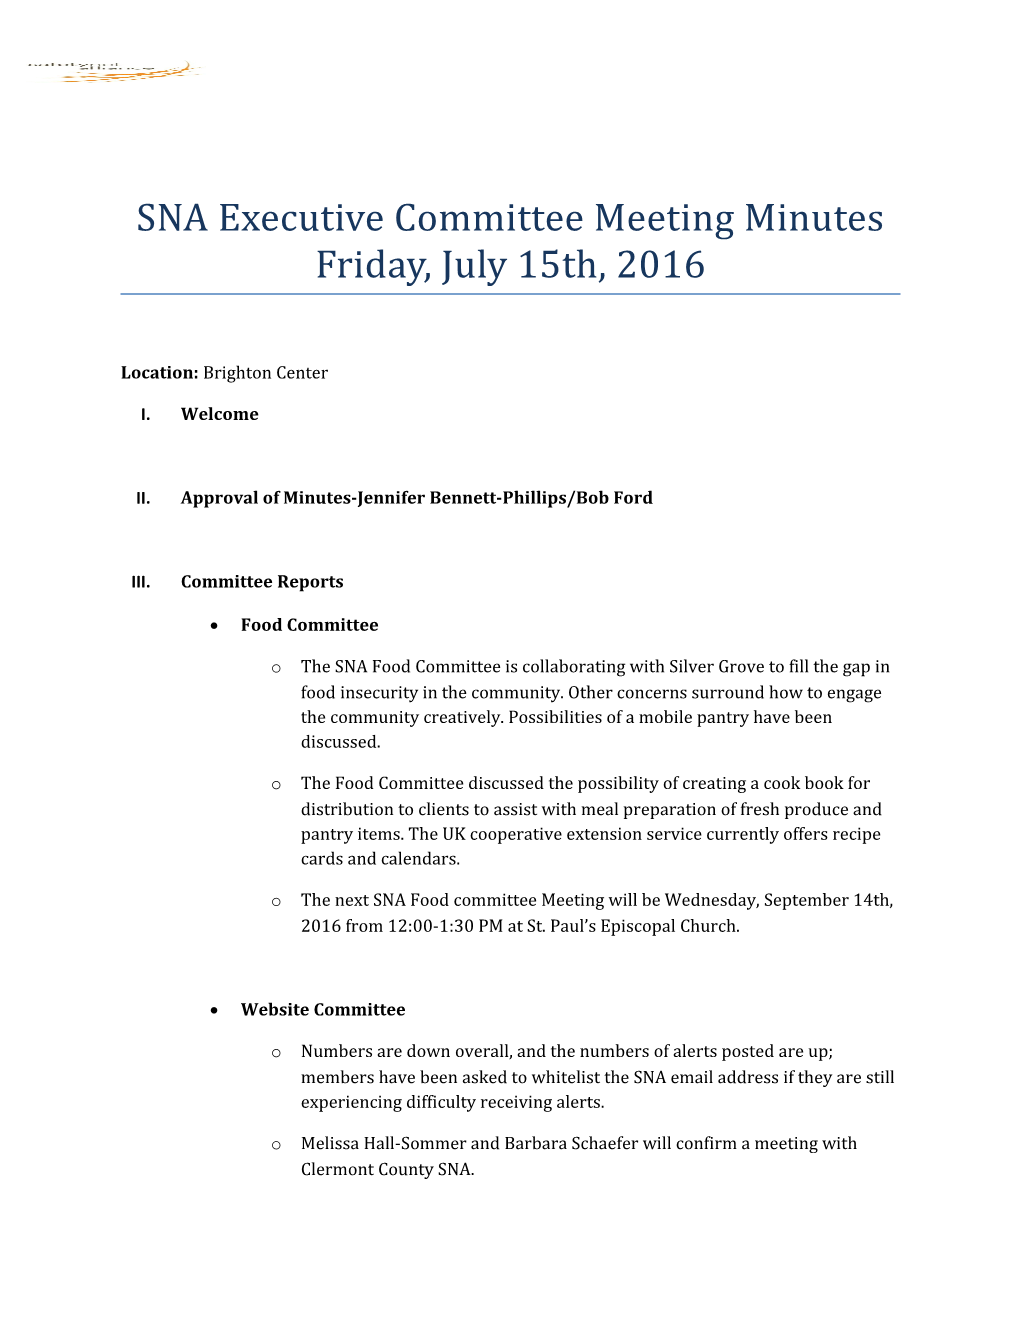 SNA Executive Committee Meeting Minutes Friday, July 15Th, 2016